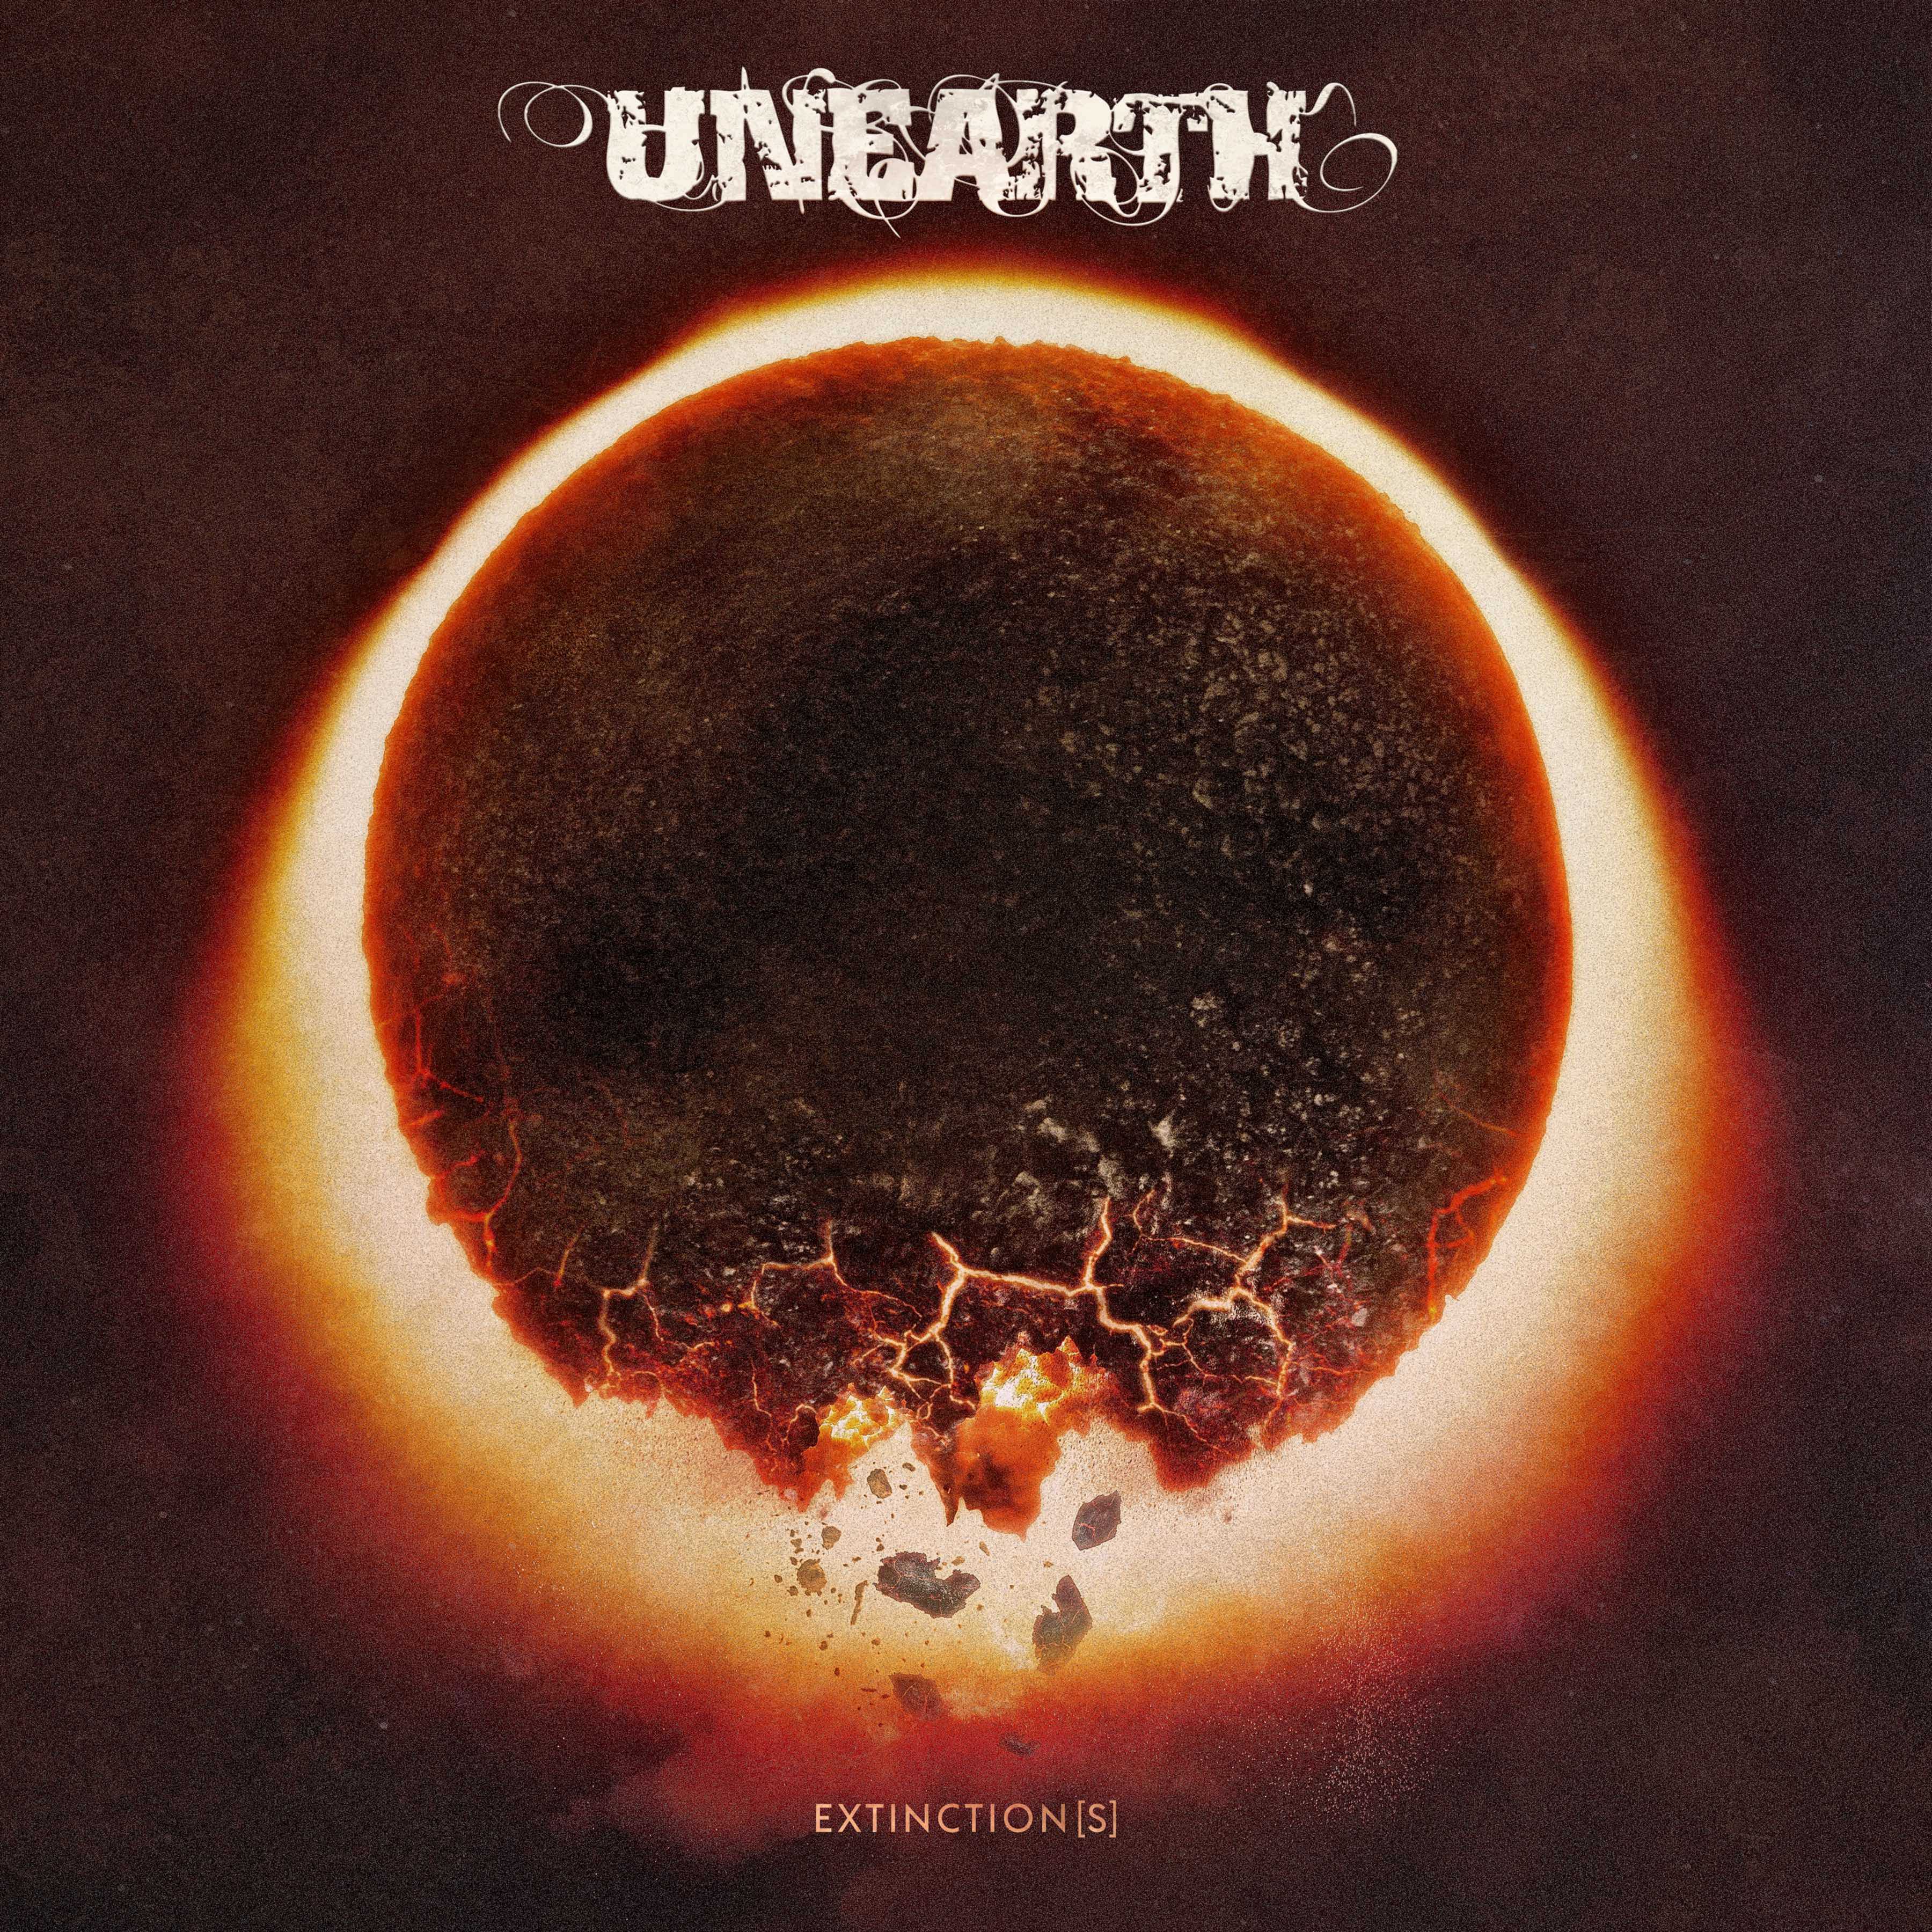 UNEARTH Streaming New Lyric Video For 'Survivalist' - "Extinction(s)" Pre-Order Info Announced